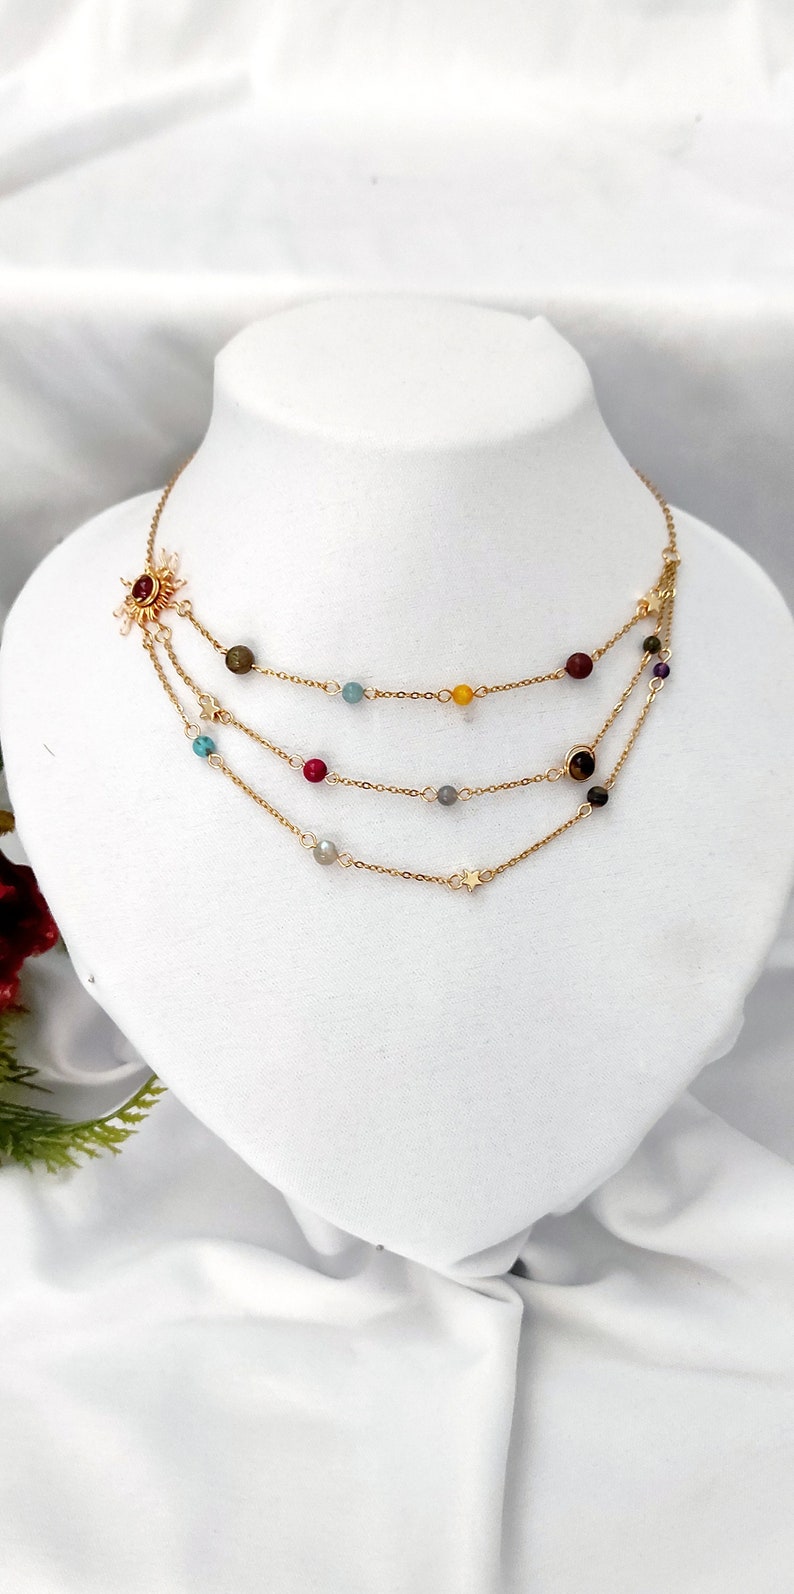 Sun Necklace, Crystal Necklace,Gold Stainless Steel Layered Necklace, Multi Chain Necklace zdjęcie 1